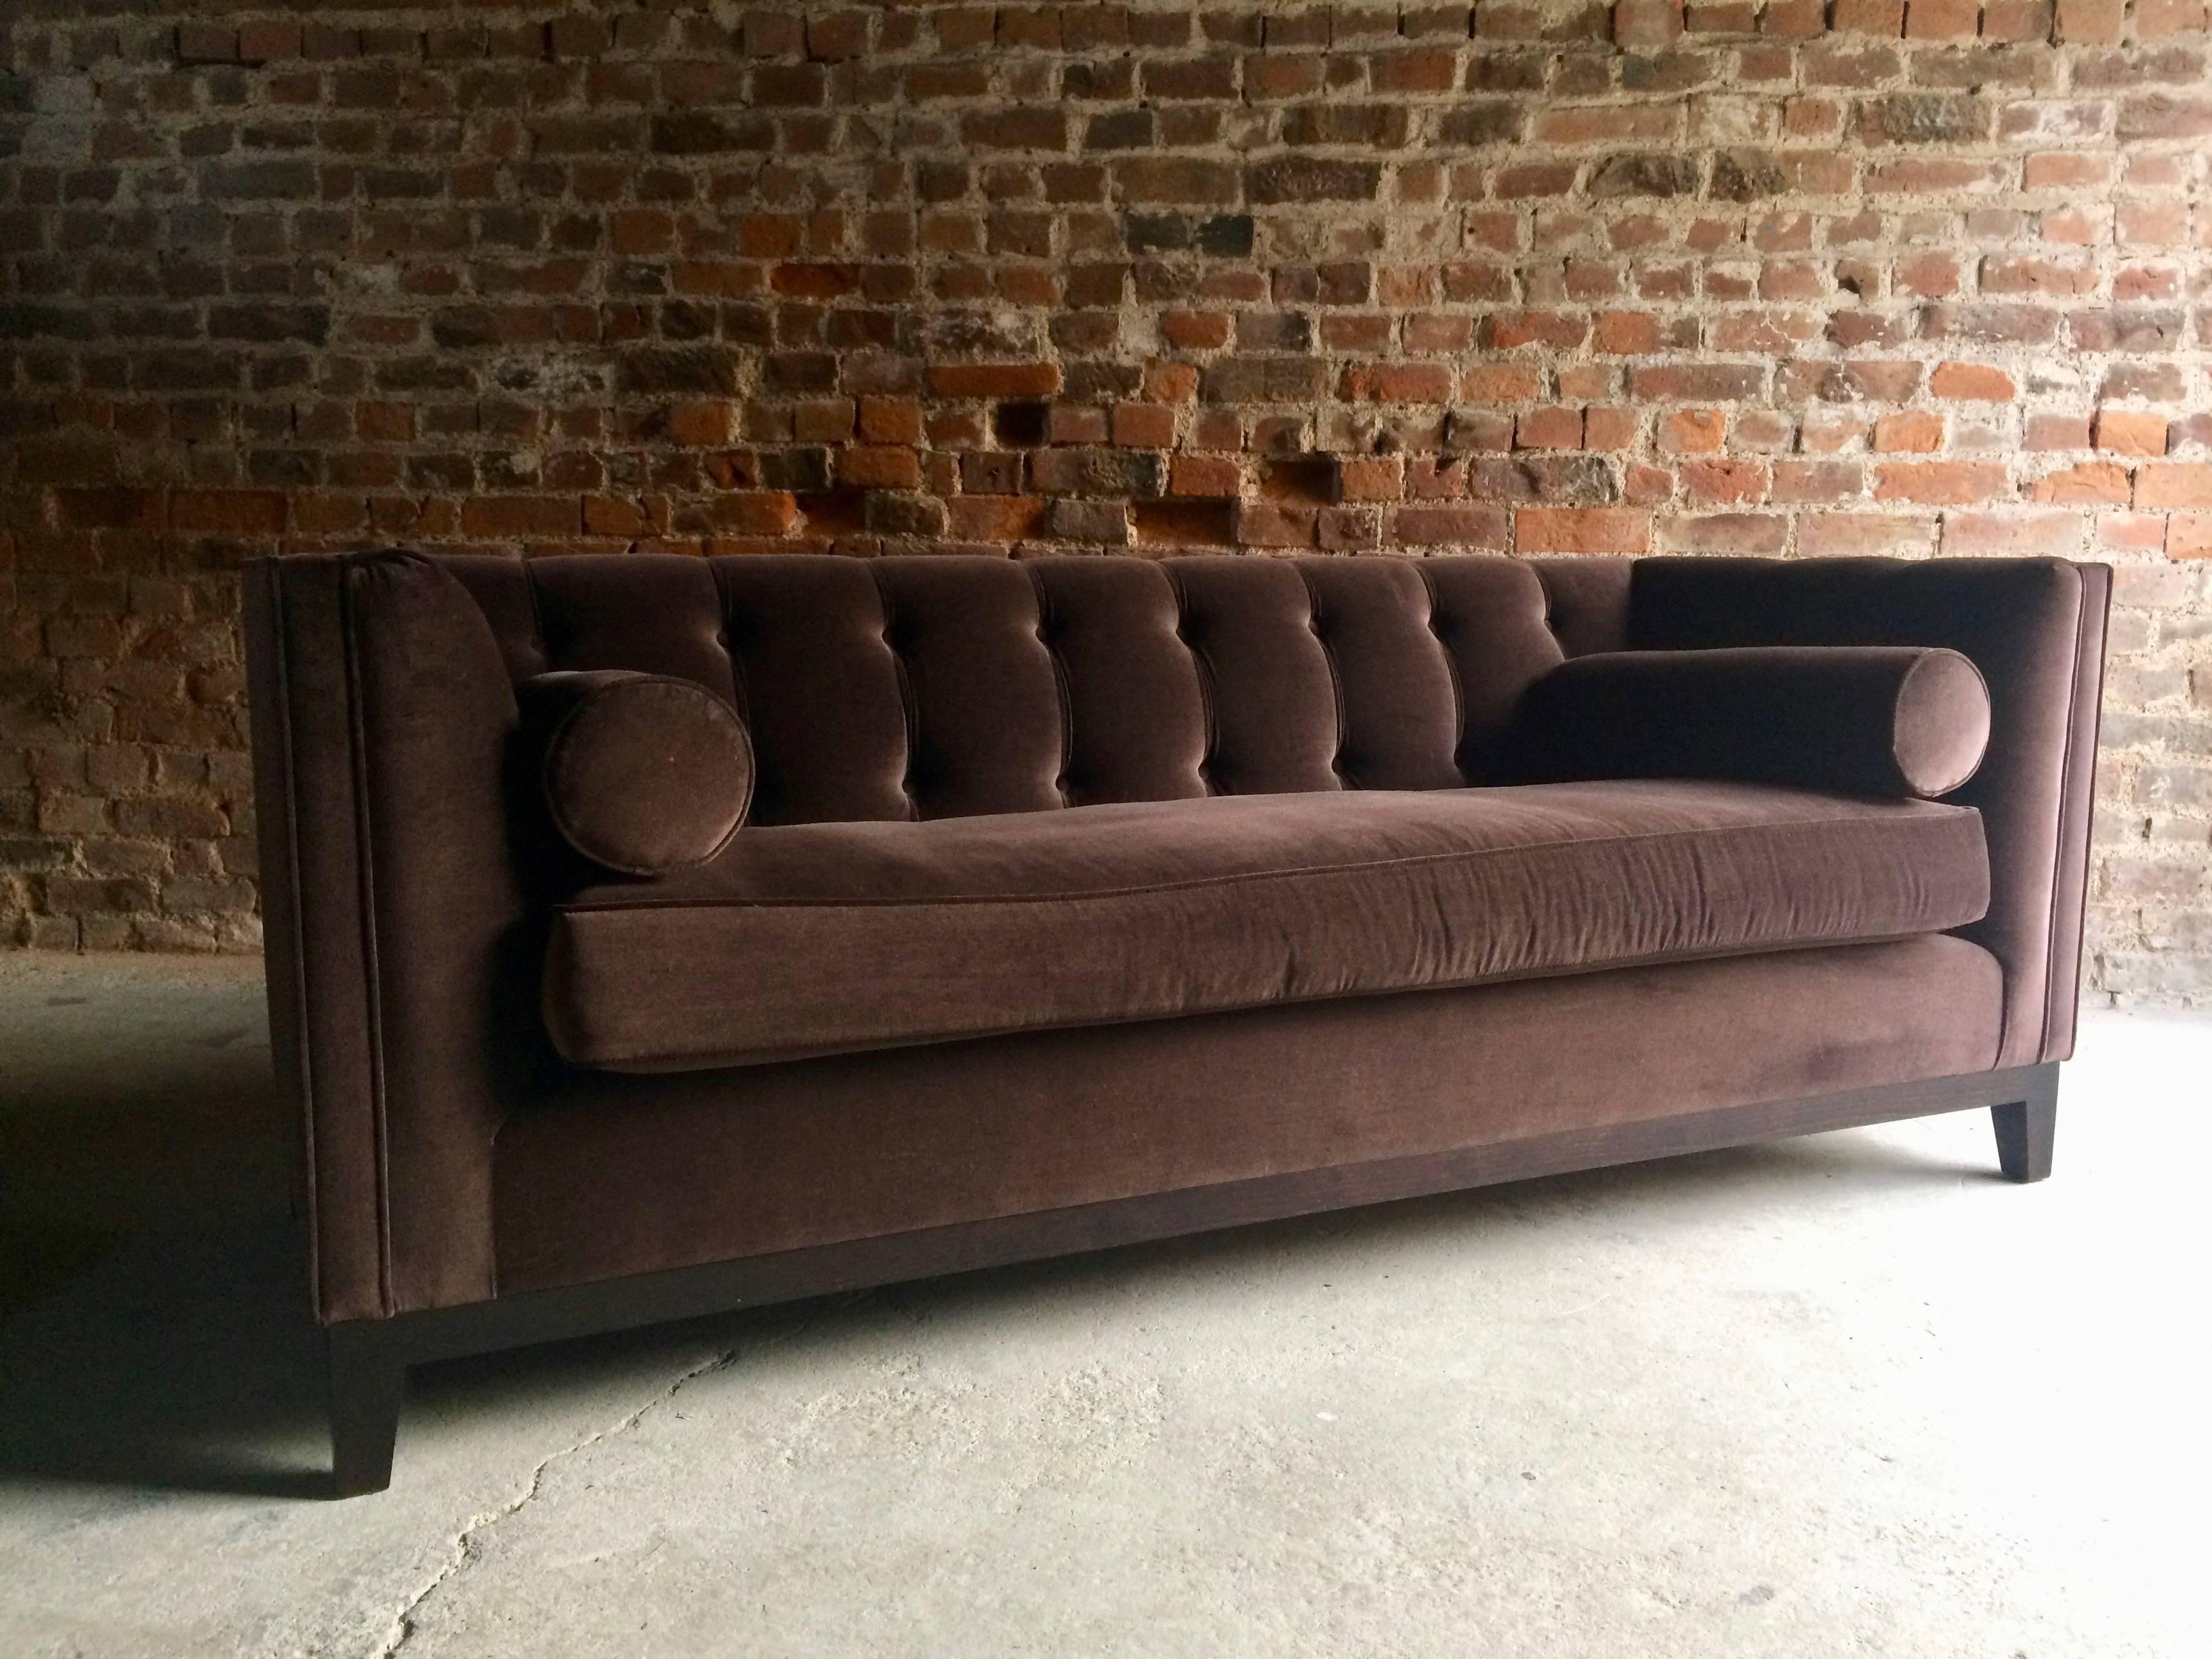 Bespoke Chesterfield Sofa with Matching Foot Stool Brown Velvet Sublime 2